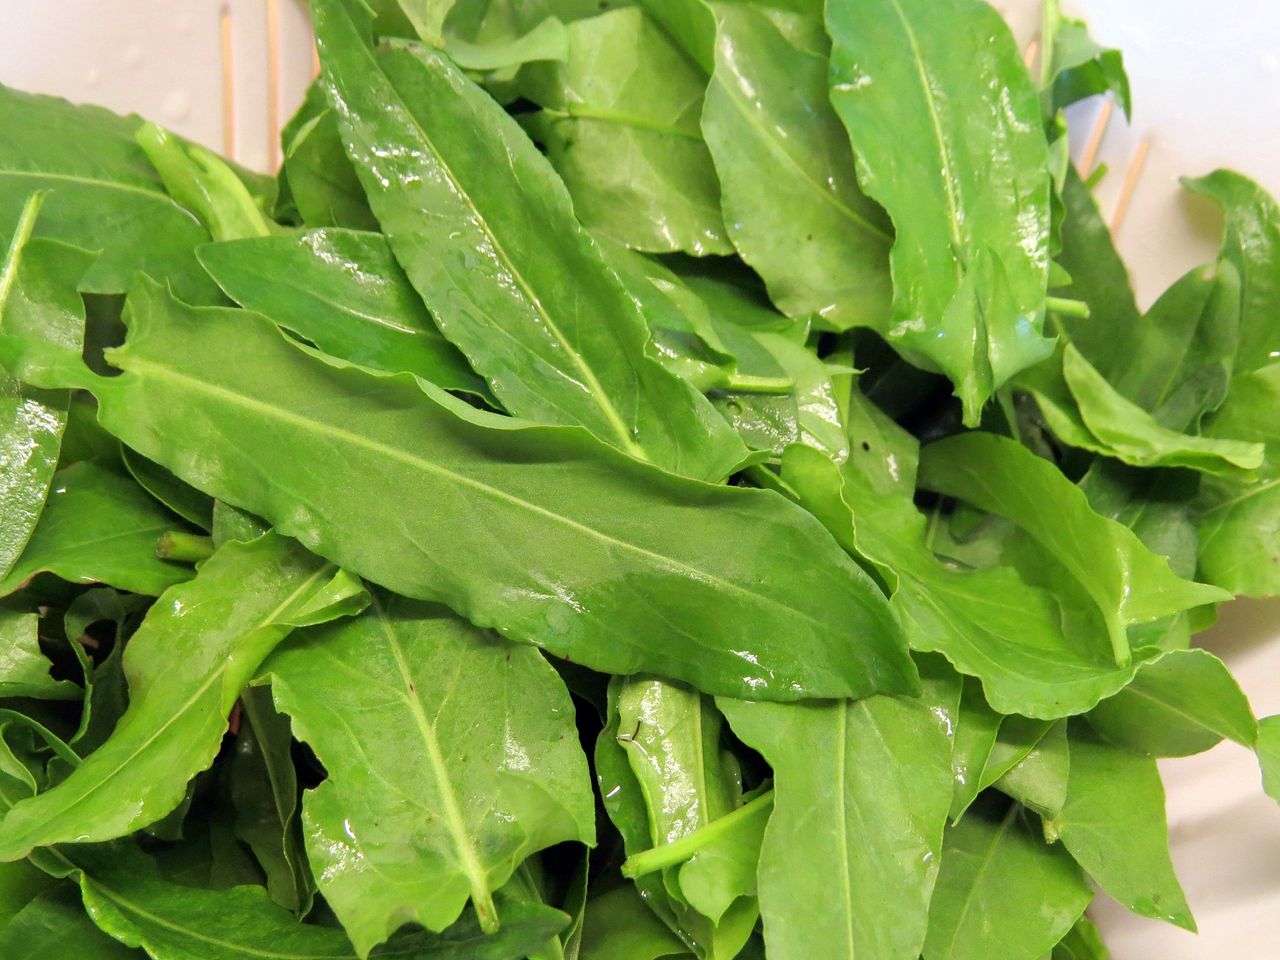 Sorrel - to eat or not to eat